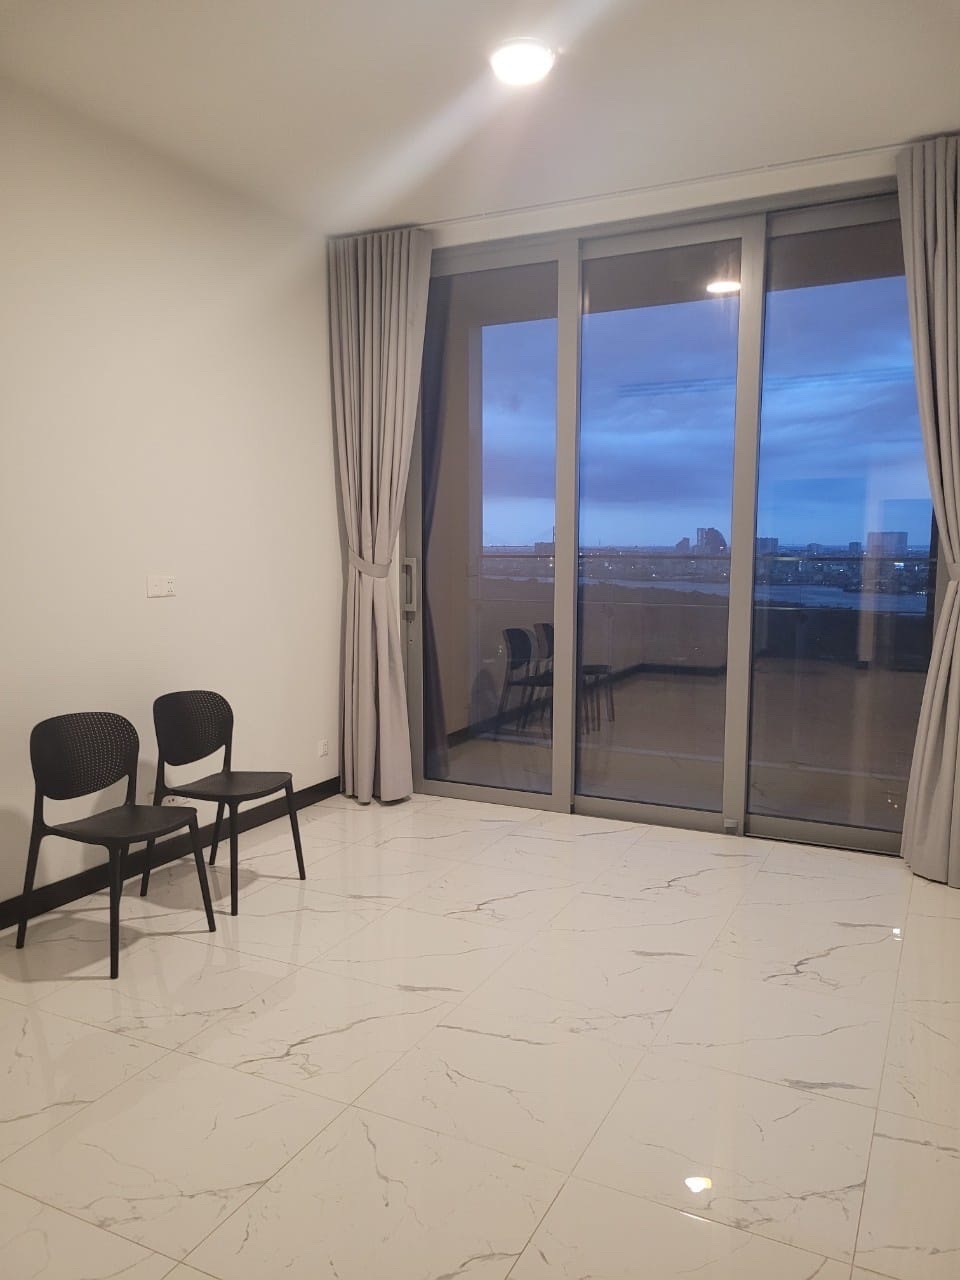 2 bedroom apartment for rent in Empire City with cheap price